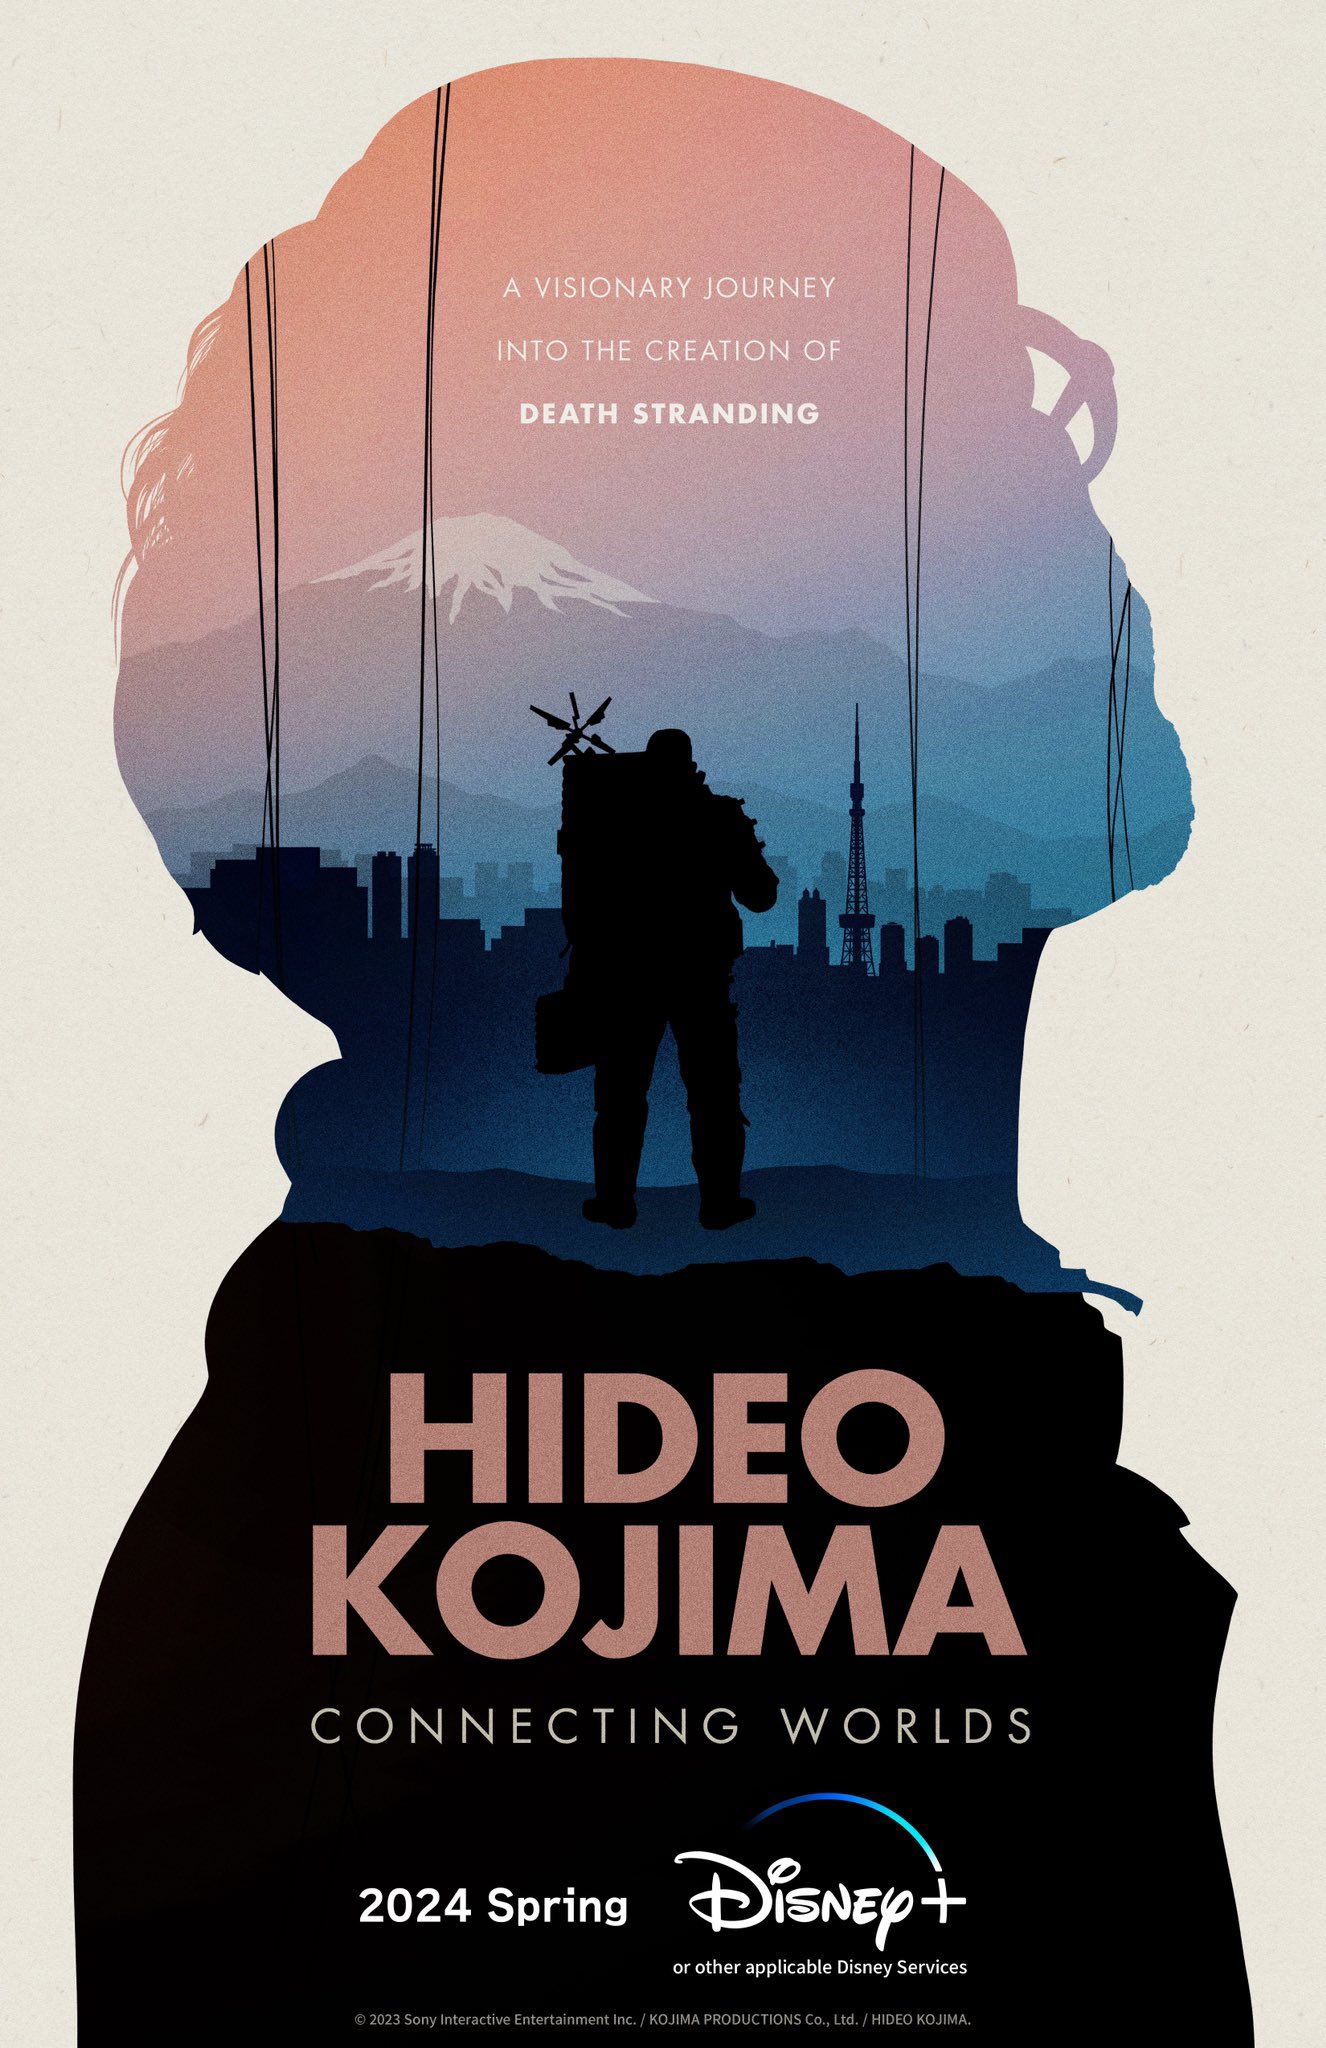 HIDEO_KOJIMA on X: "My documentary film "HIDEO KOJIMA: CONNECTING WORLDS"  which had its world premiere at the Tribeca Film Festival in New York in  June, will be distributed worldwide in the spring